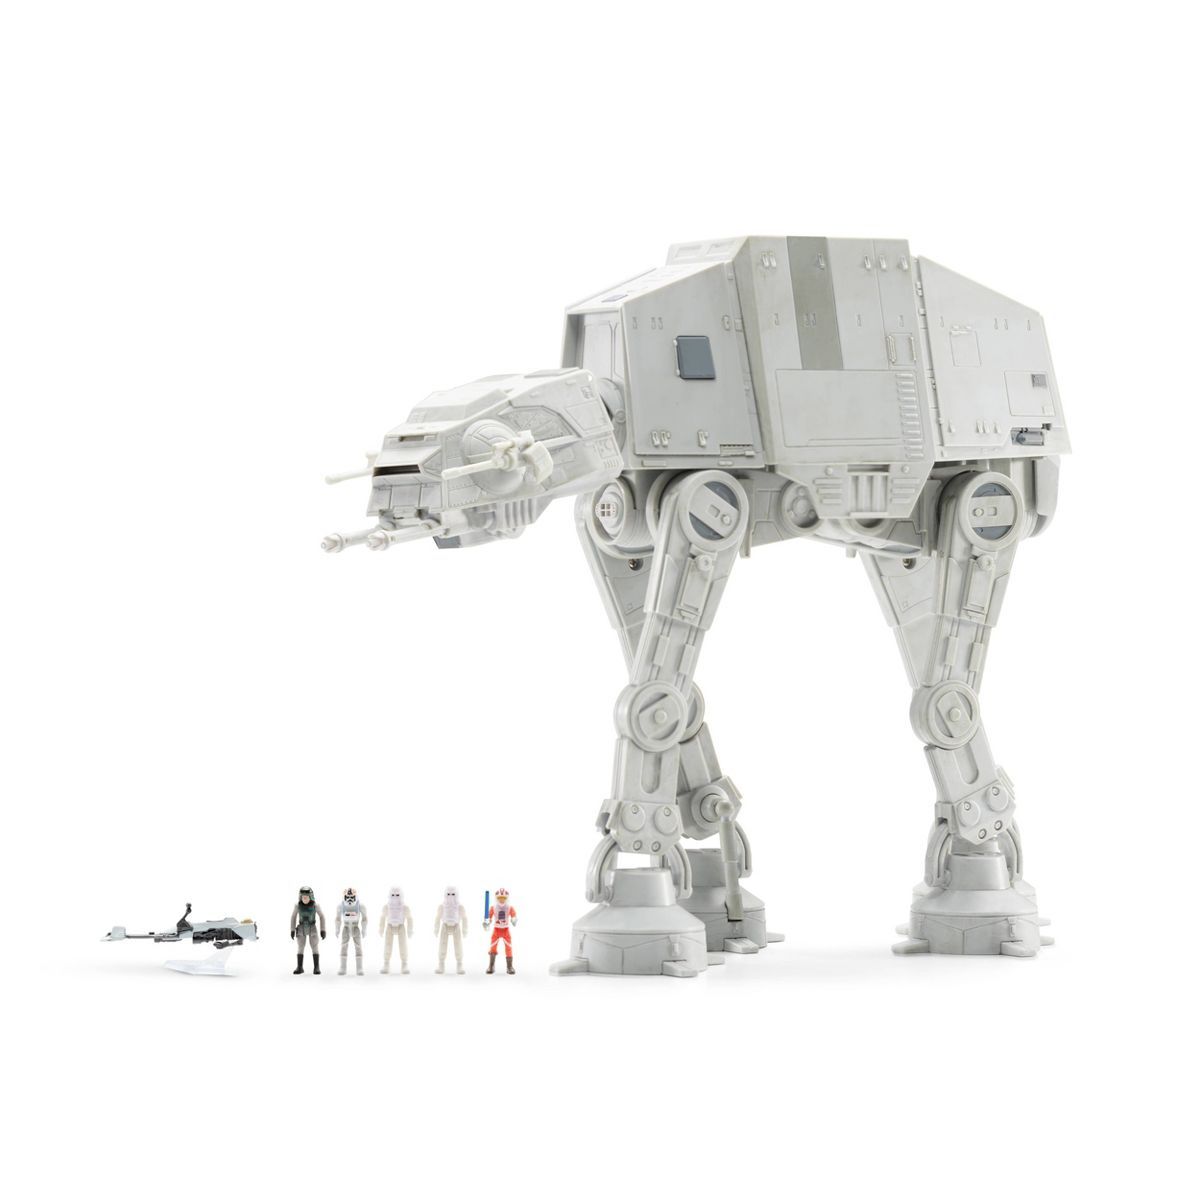 Star Wars Micro Galaxy Squadron AT-AT Walker Action Figure with Mini Figures Set - 9pc | Target